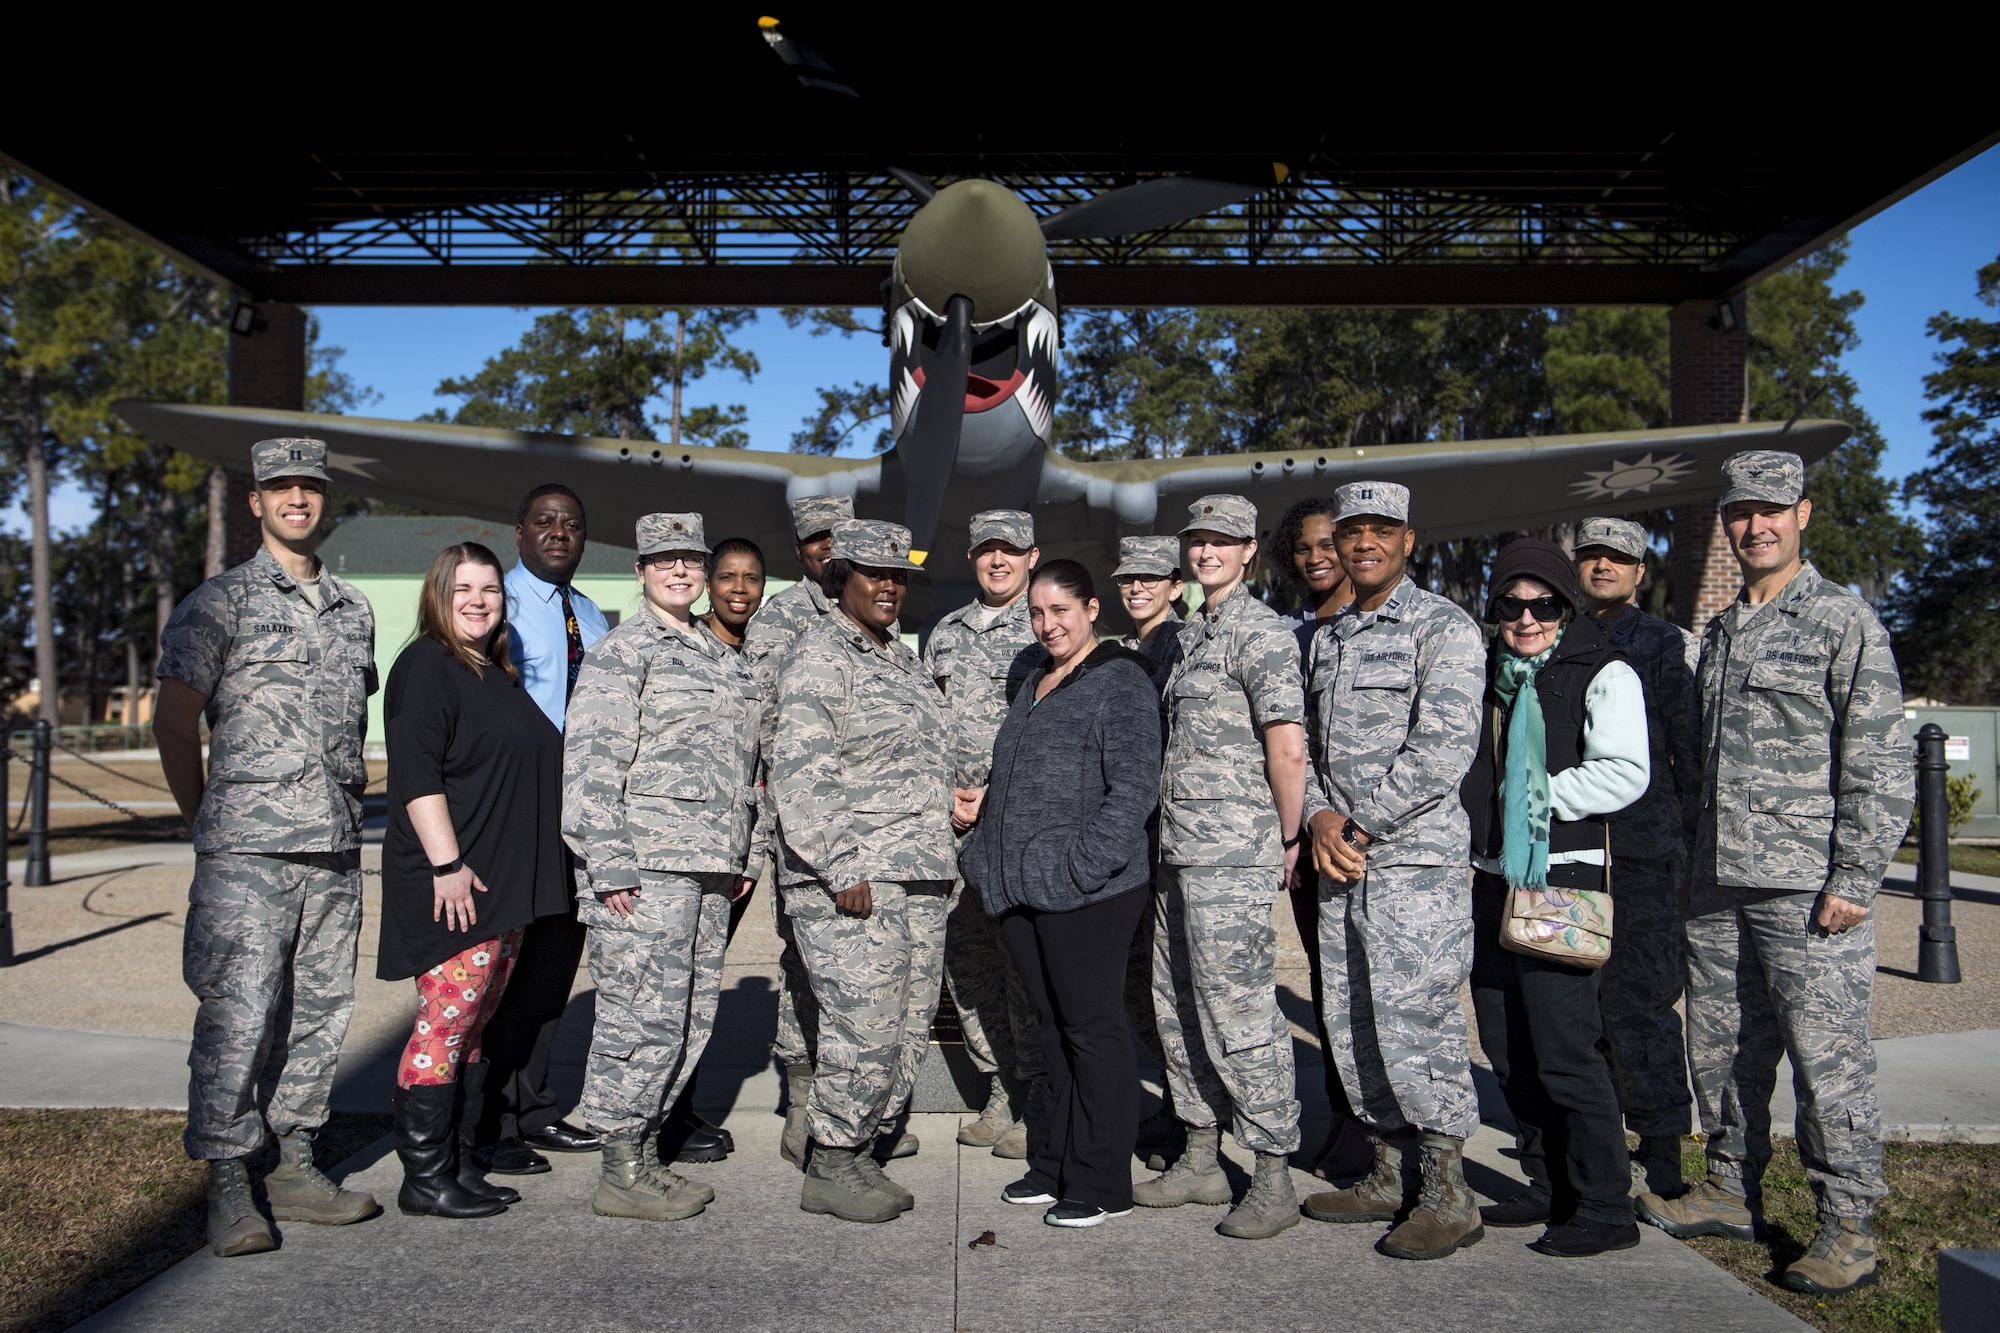 Members of Team Moody’s Biomedical Science Corps pose for a photo, Jan. 23, 2018, at Moody Air Force Base, Ga. The Biomedical Science Corps became the most diverse corps in the Air Force Medical Services when the Chief of Staff of the Air Force signed a special order on Jan. 28, 1965. (U.S. Air Force photo by Senior Airman Daniel Snider)